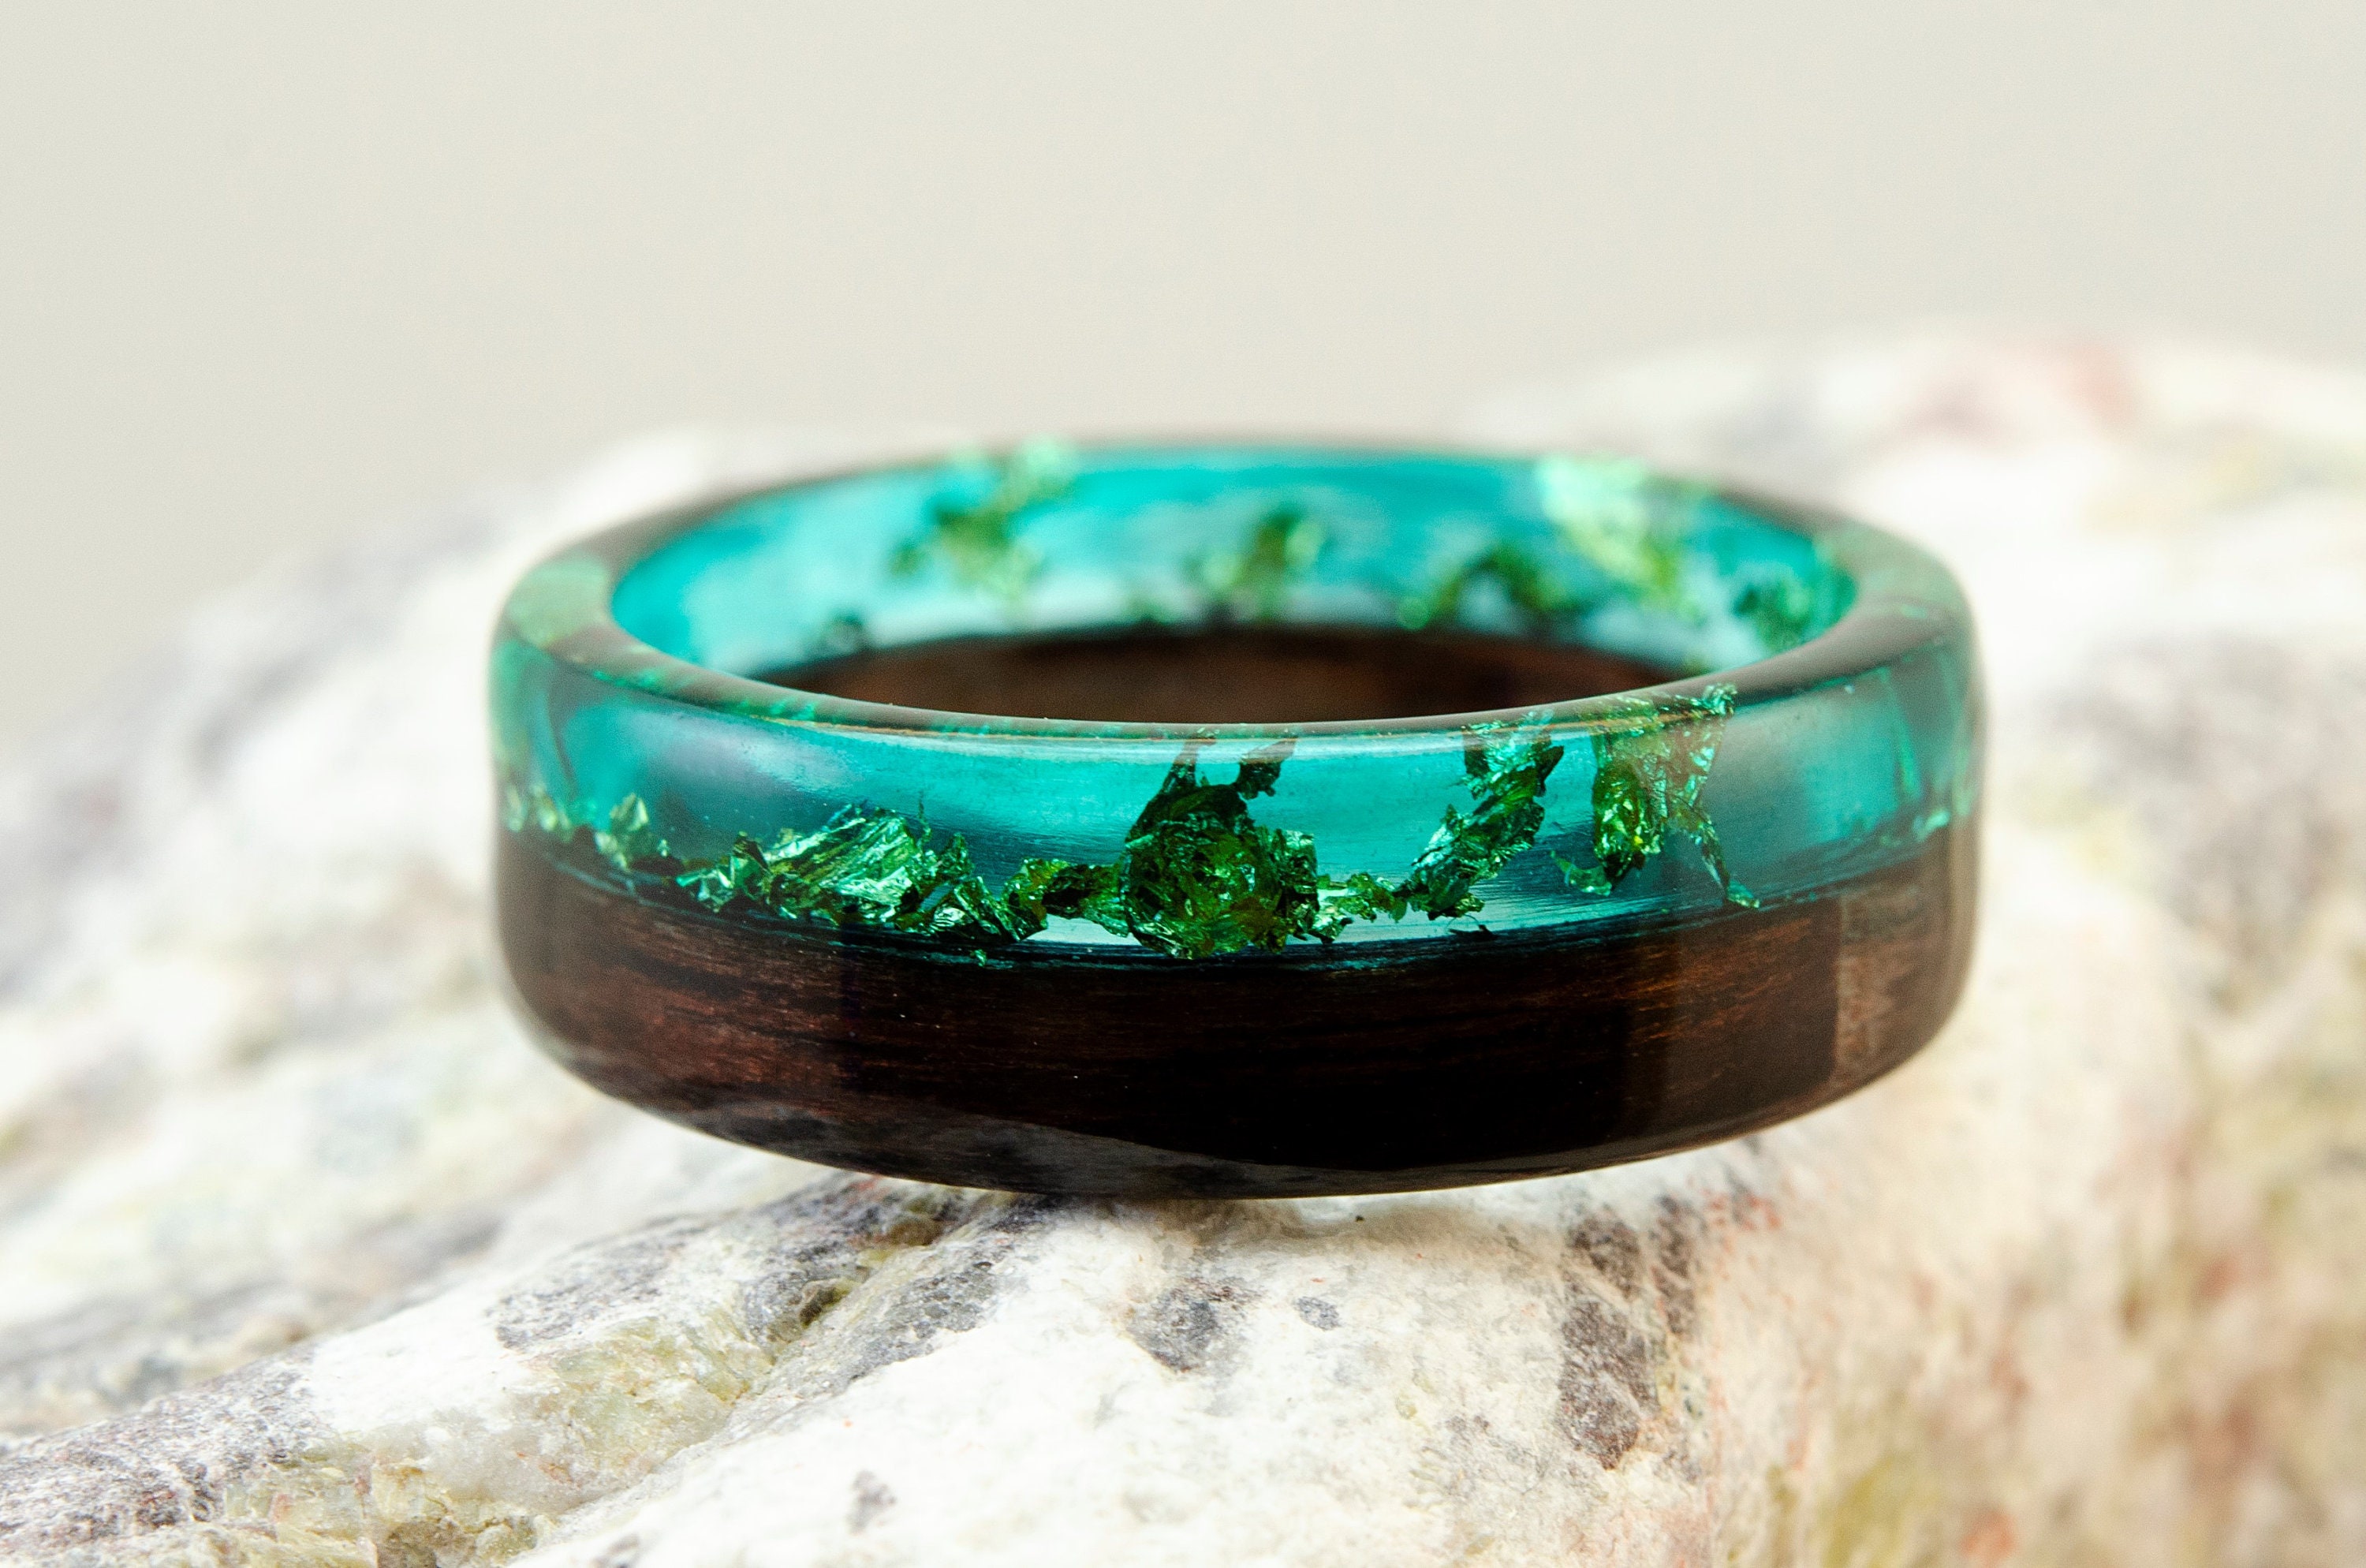 Wood Resin Ring Exotic Wood Ring With Magic Resin Top. Blue Resin